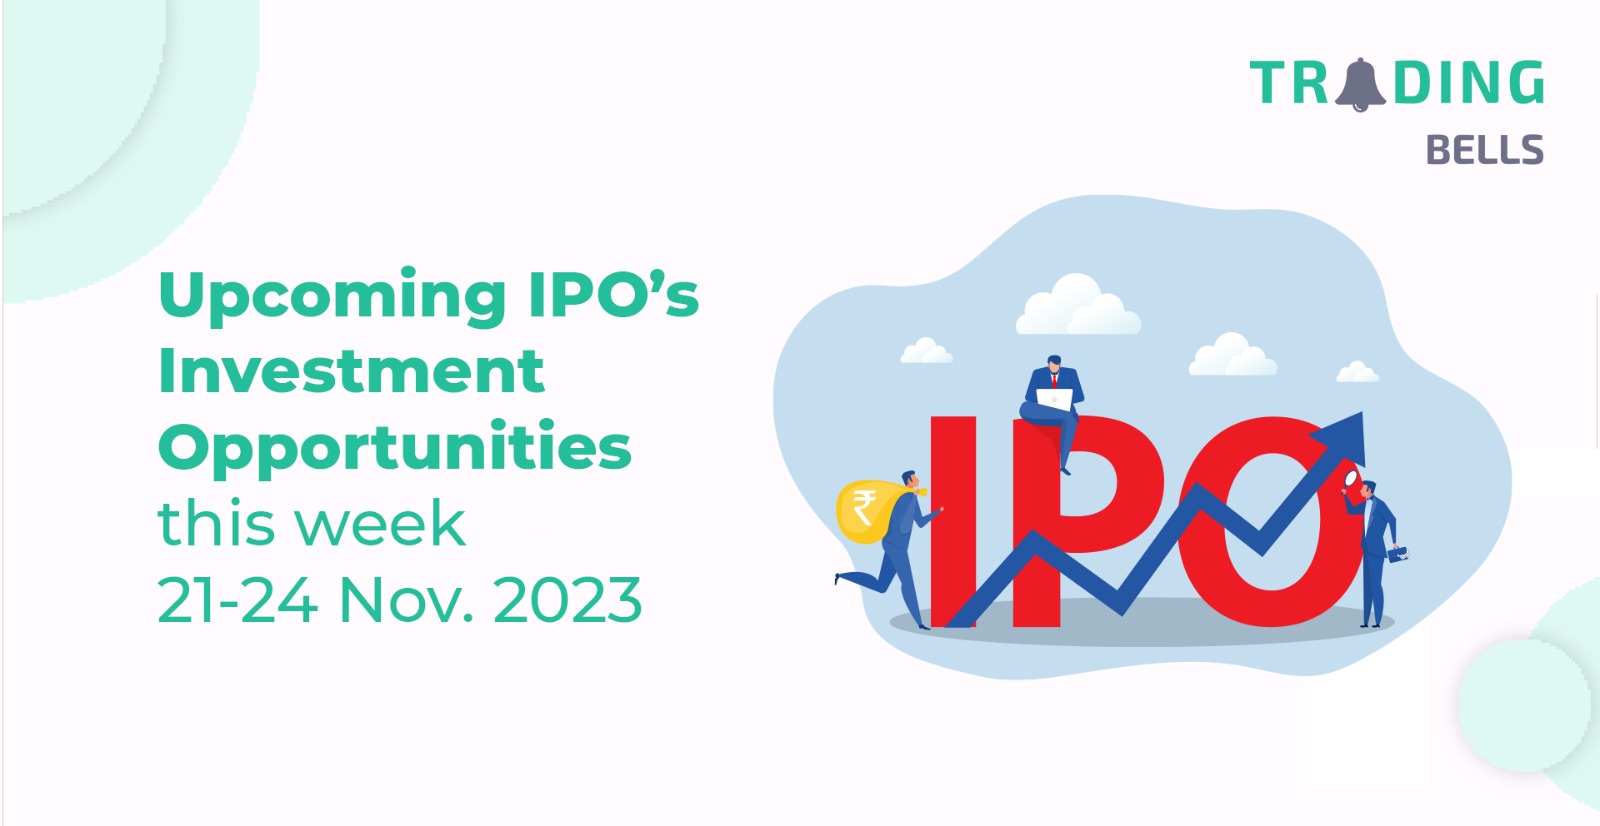 Upcoming IPO’s Opportunities